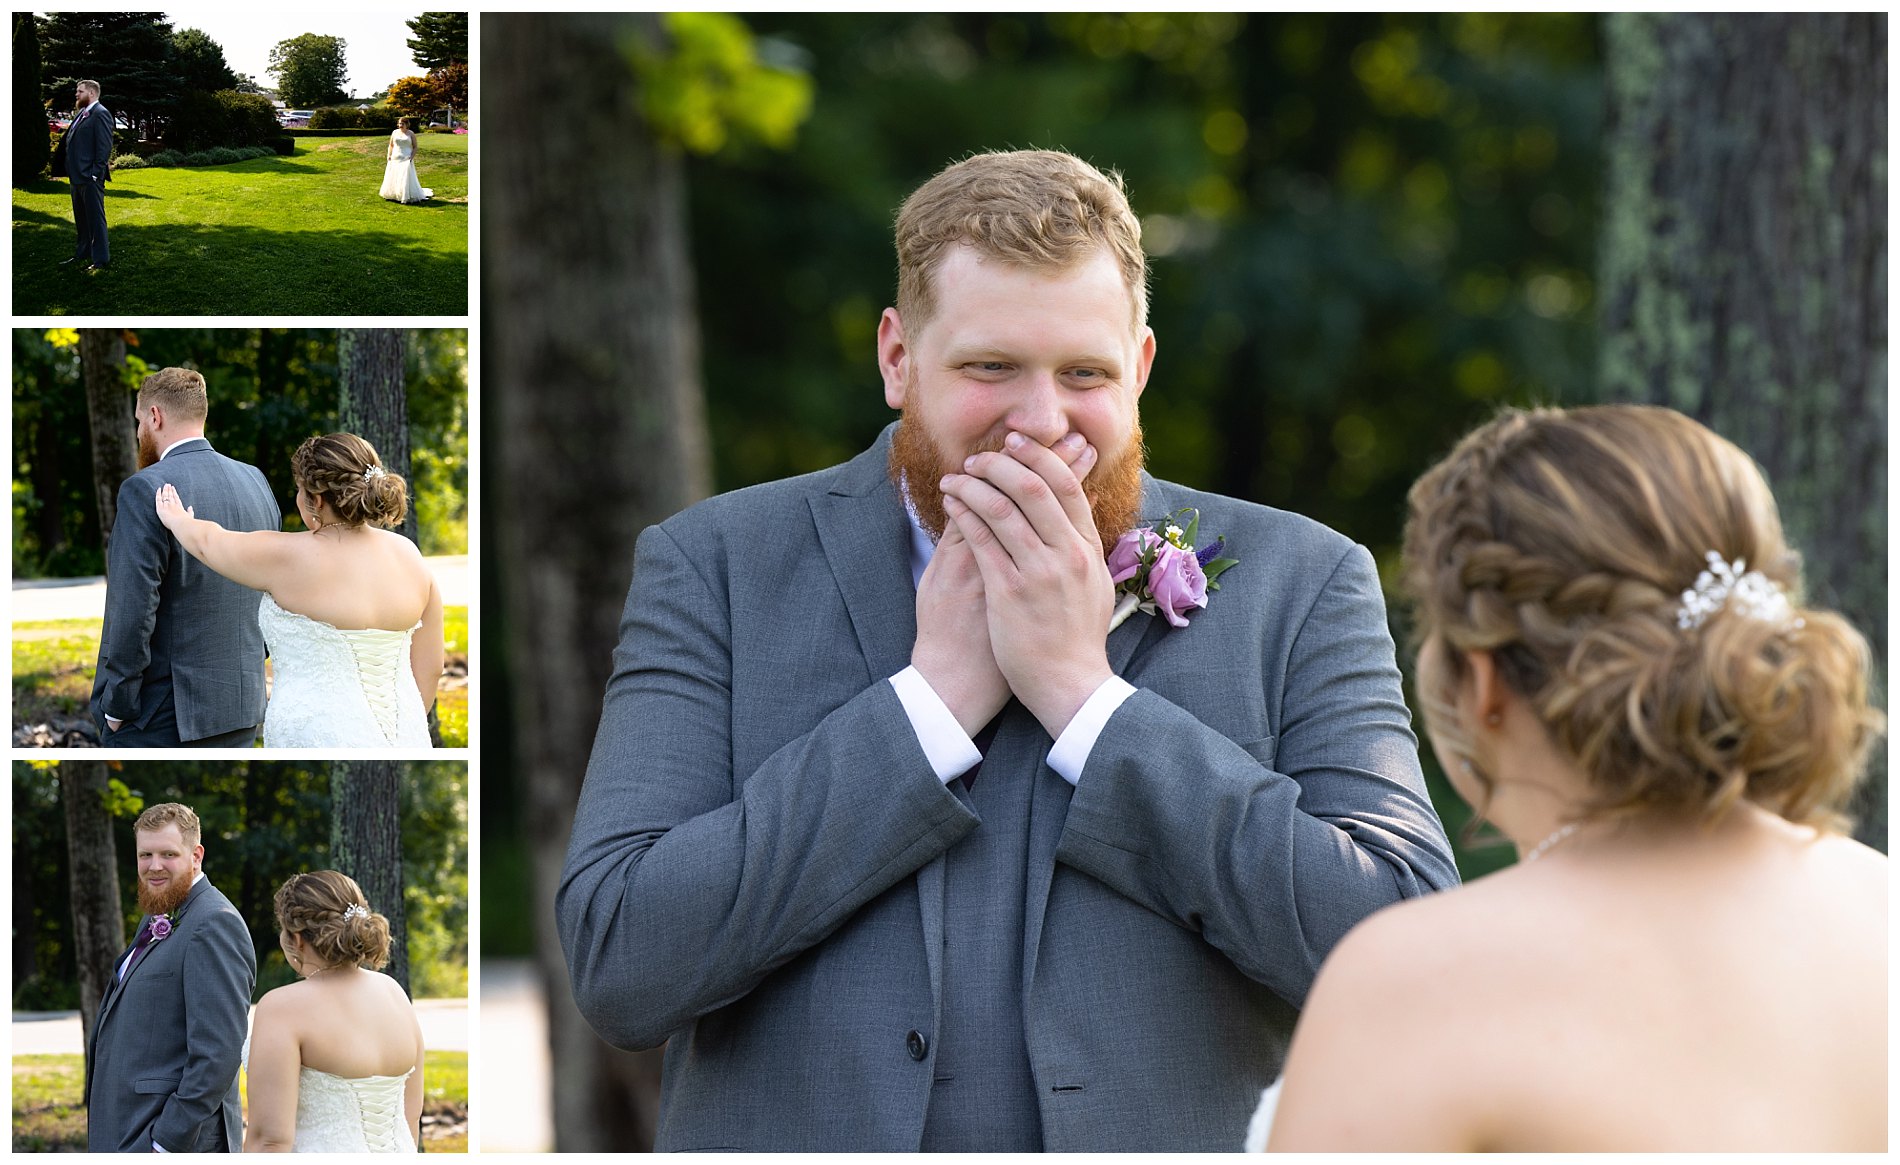 first look reaction shot of groom on seeing bride at dunegrass wedding in old orchard beach, maine